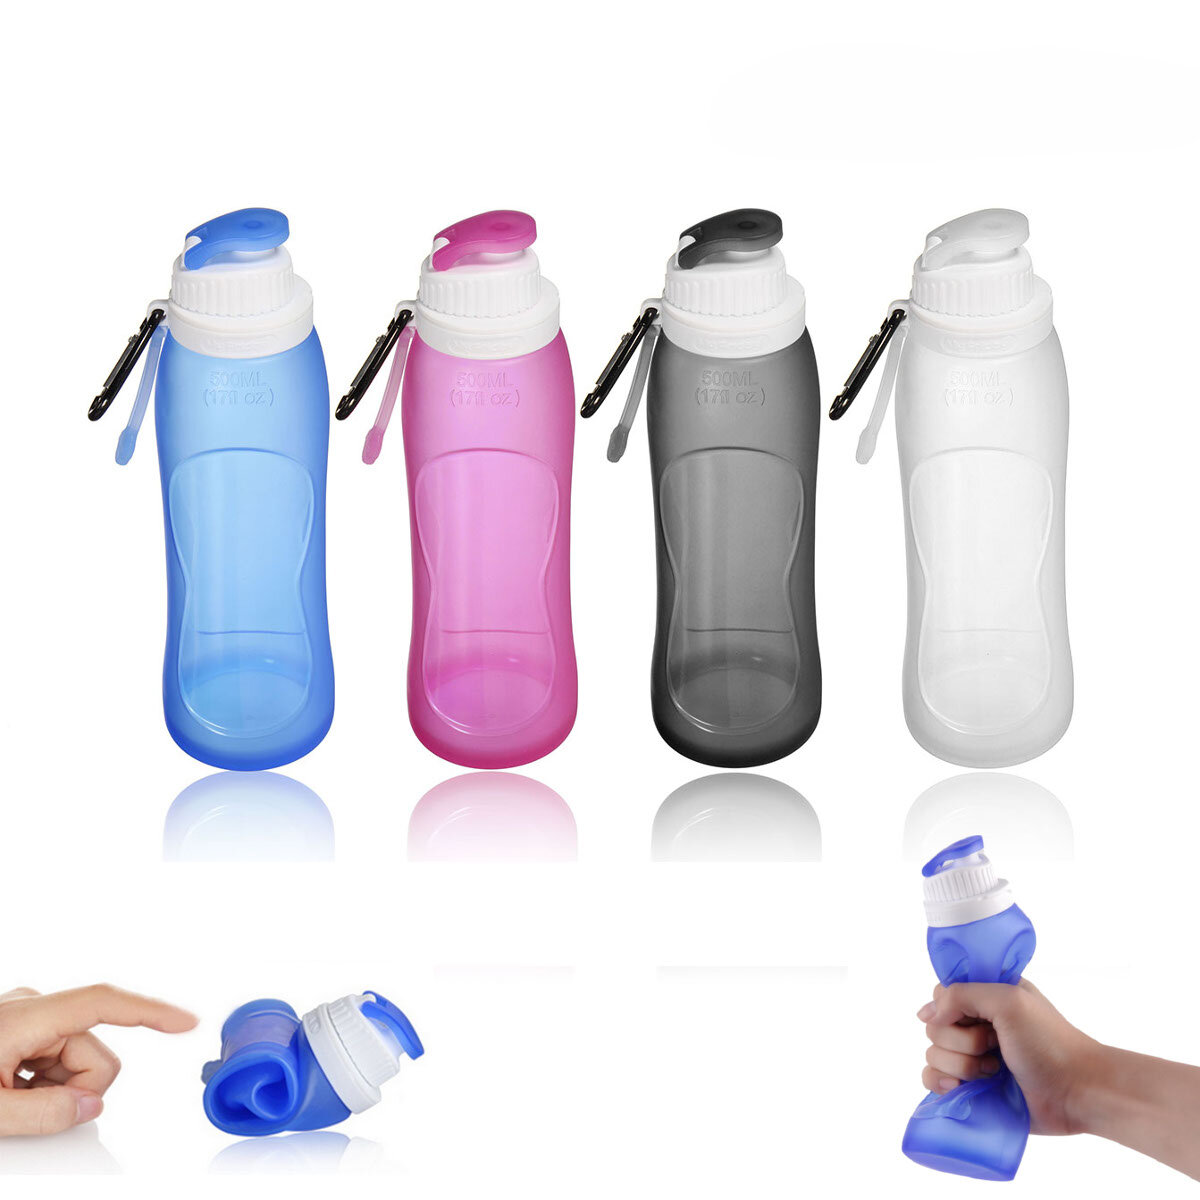 

500ML Foldable Water Bottle Silicone BPA Free Kettle Drinking Bottle Outdoor Travel Running Hiking Cycling